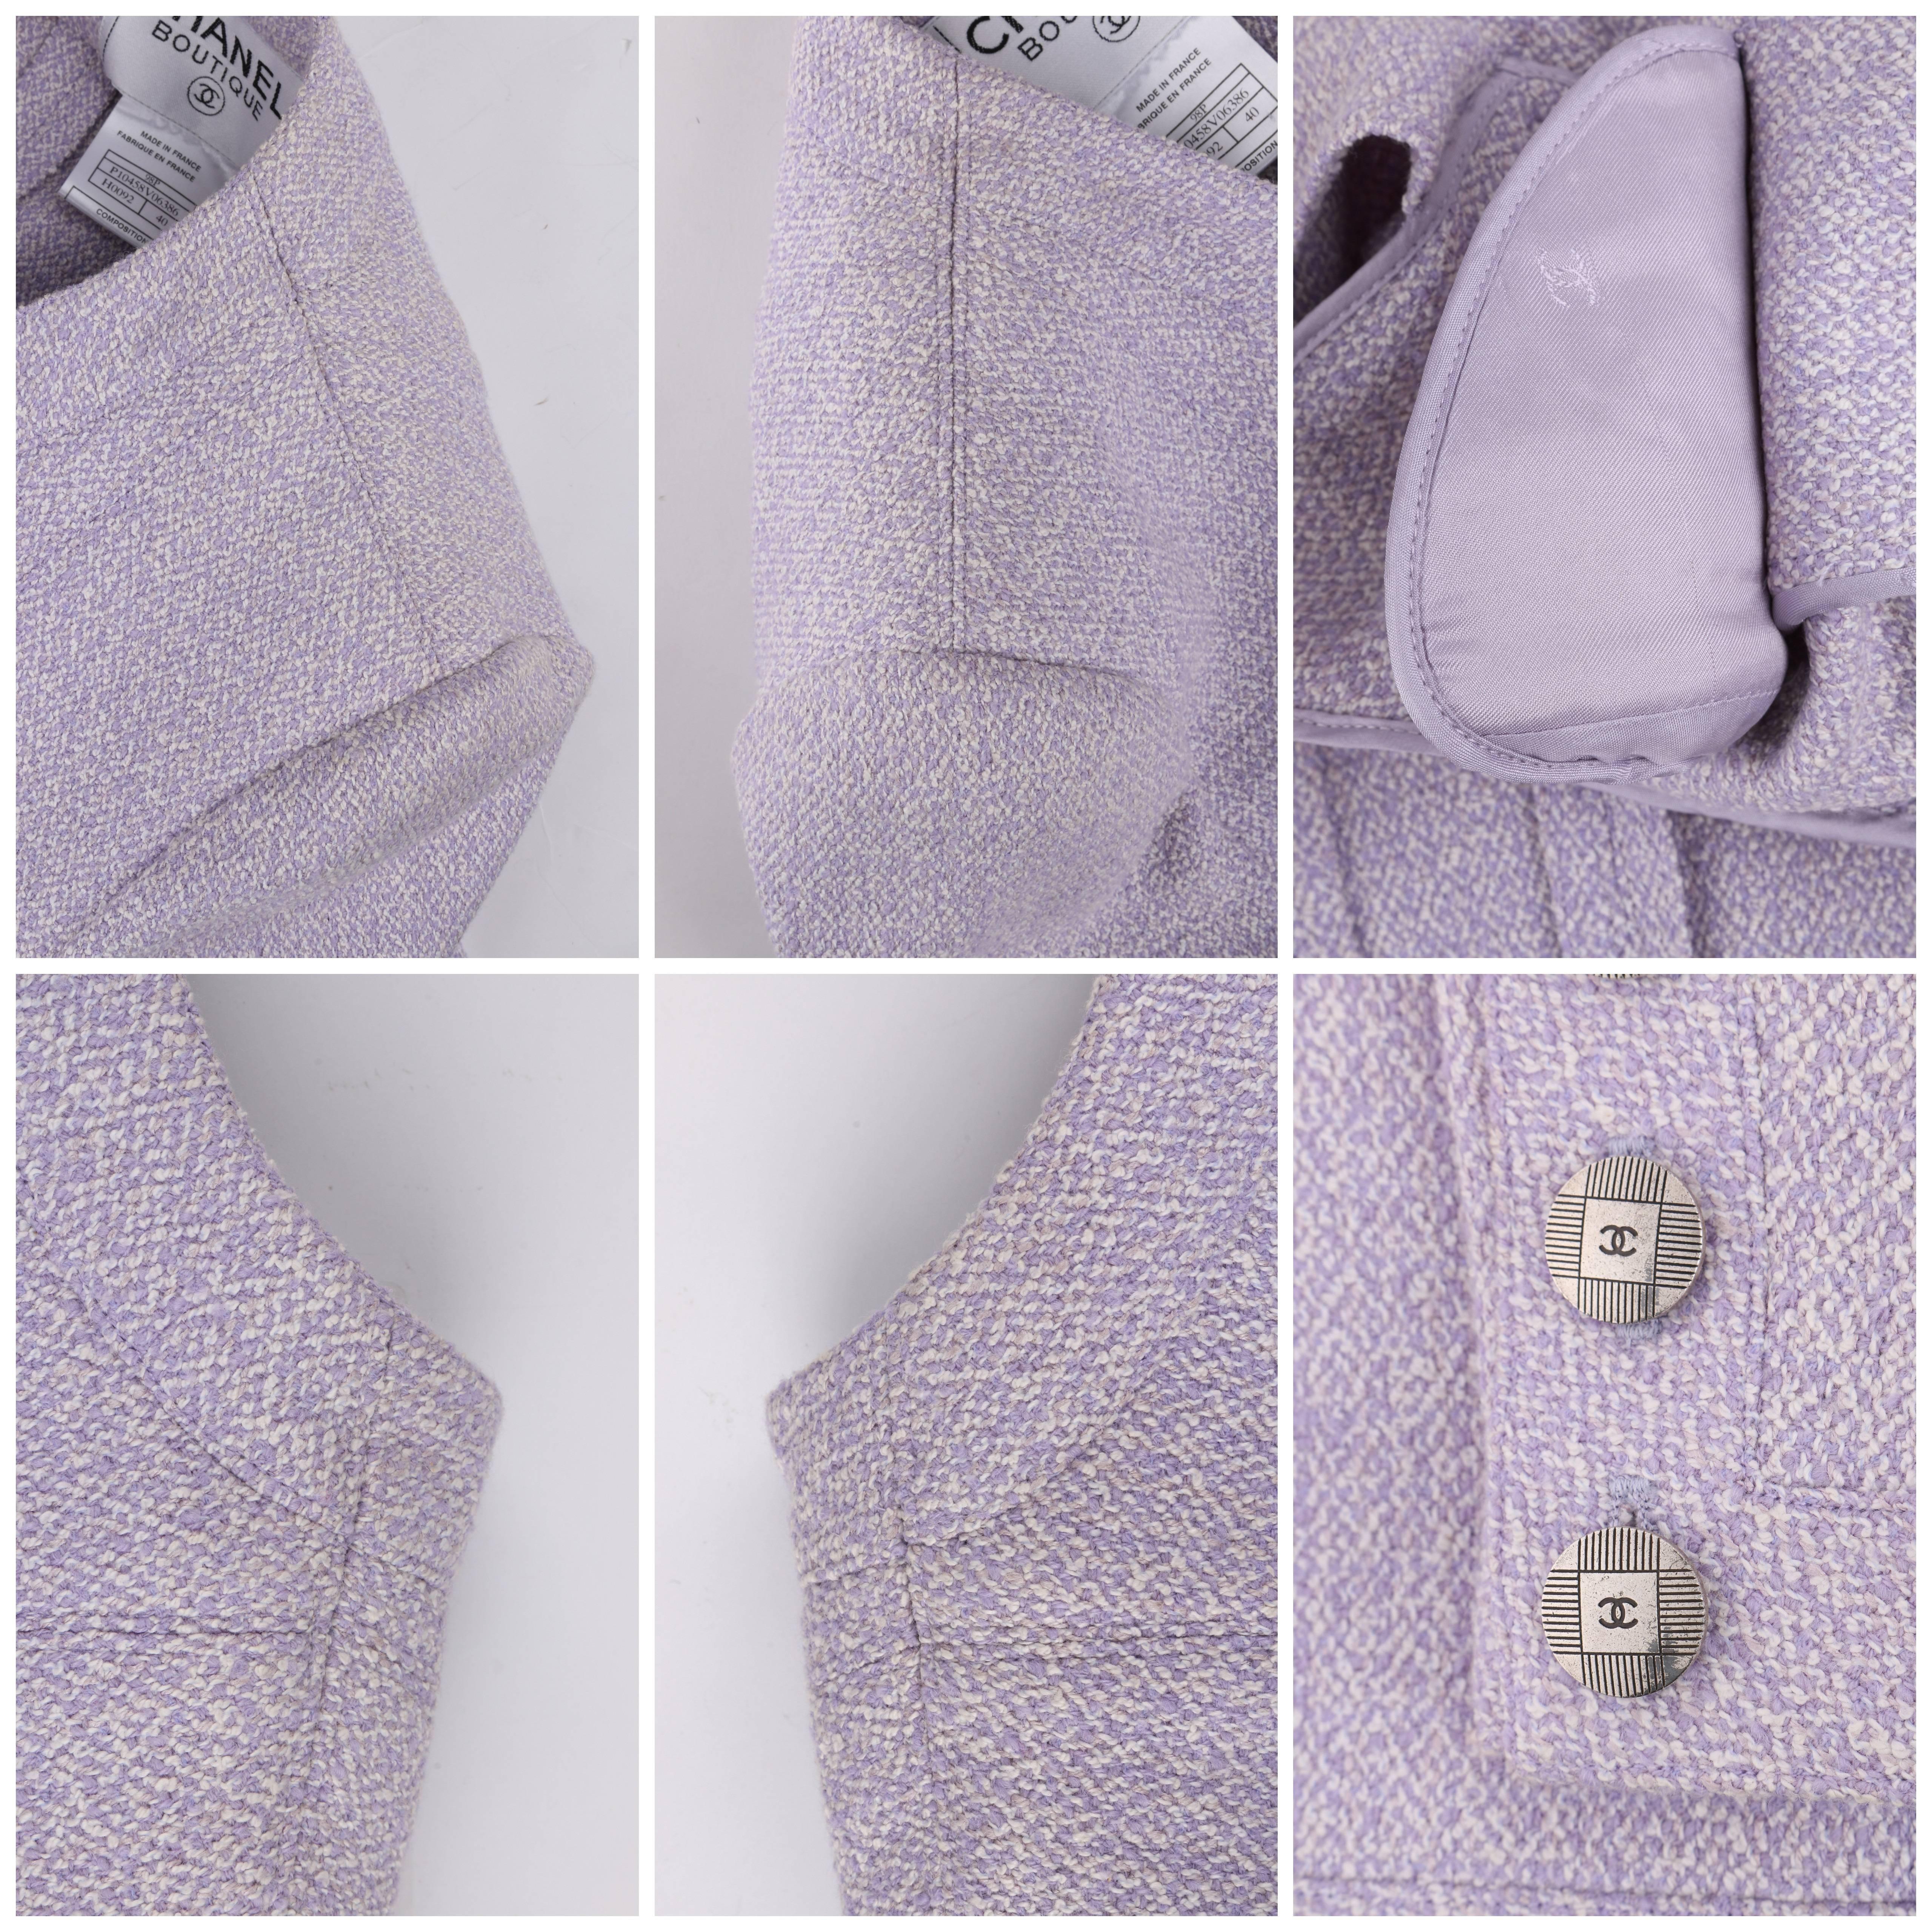 CHANEL S/S 1998 2 Pc Classic Lilac & White Wool Tweed Suit Blazer Skirt Set 40 2